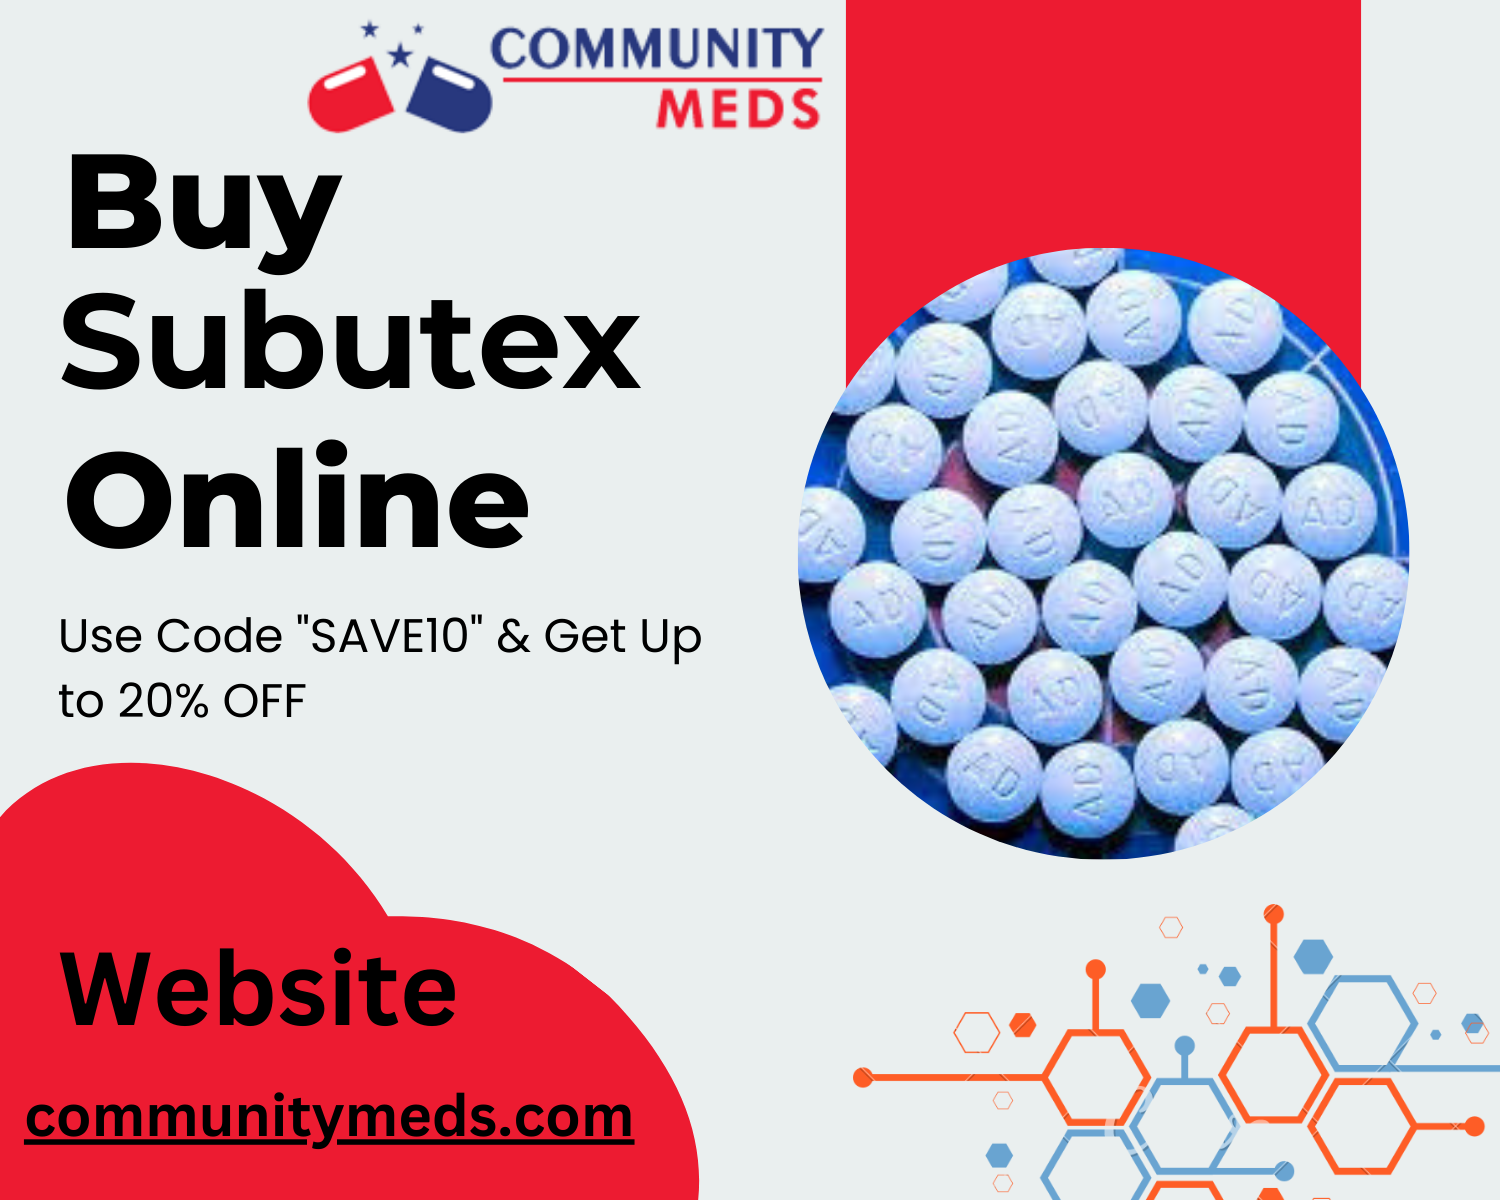 Order Subutex Online Fast Service Available At Communitymeds.com-pic_1